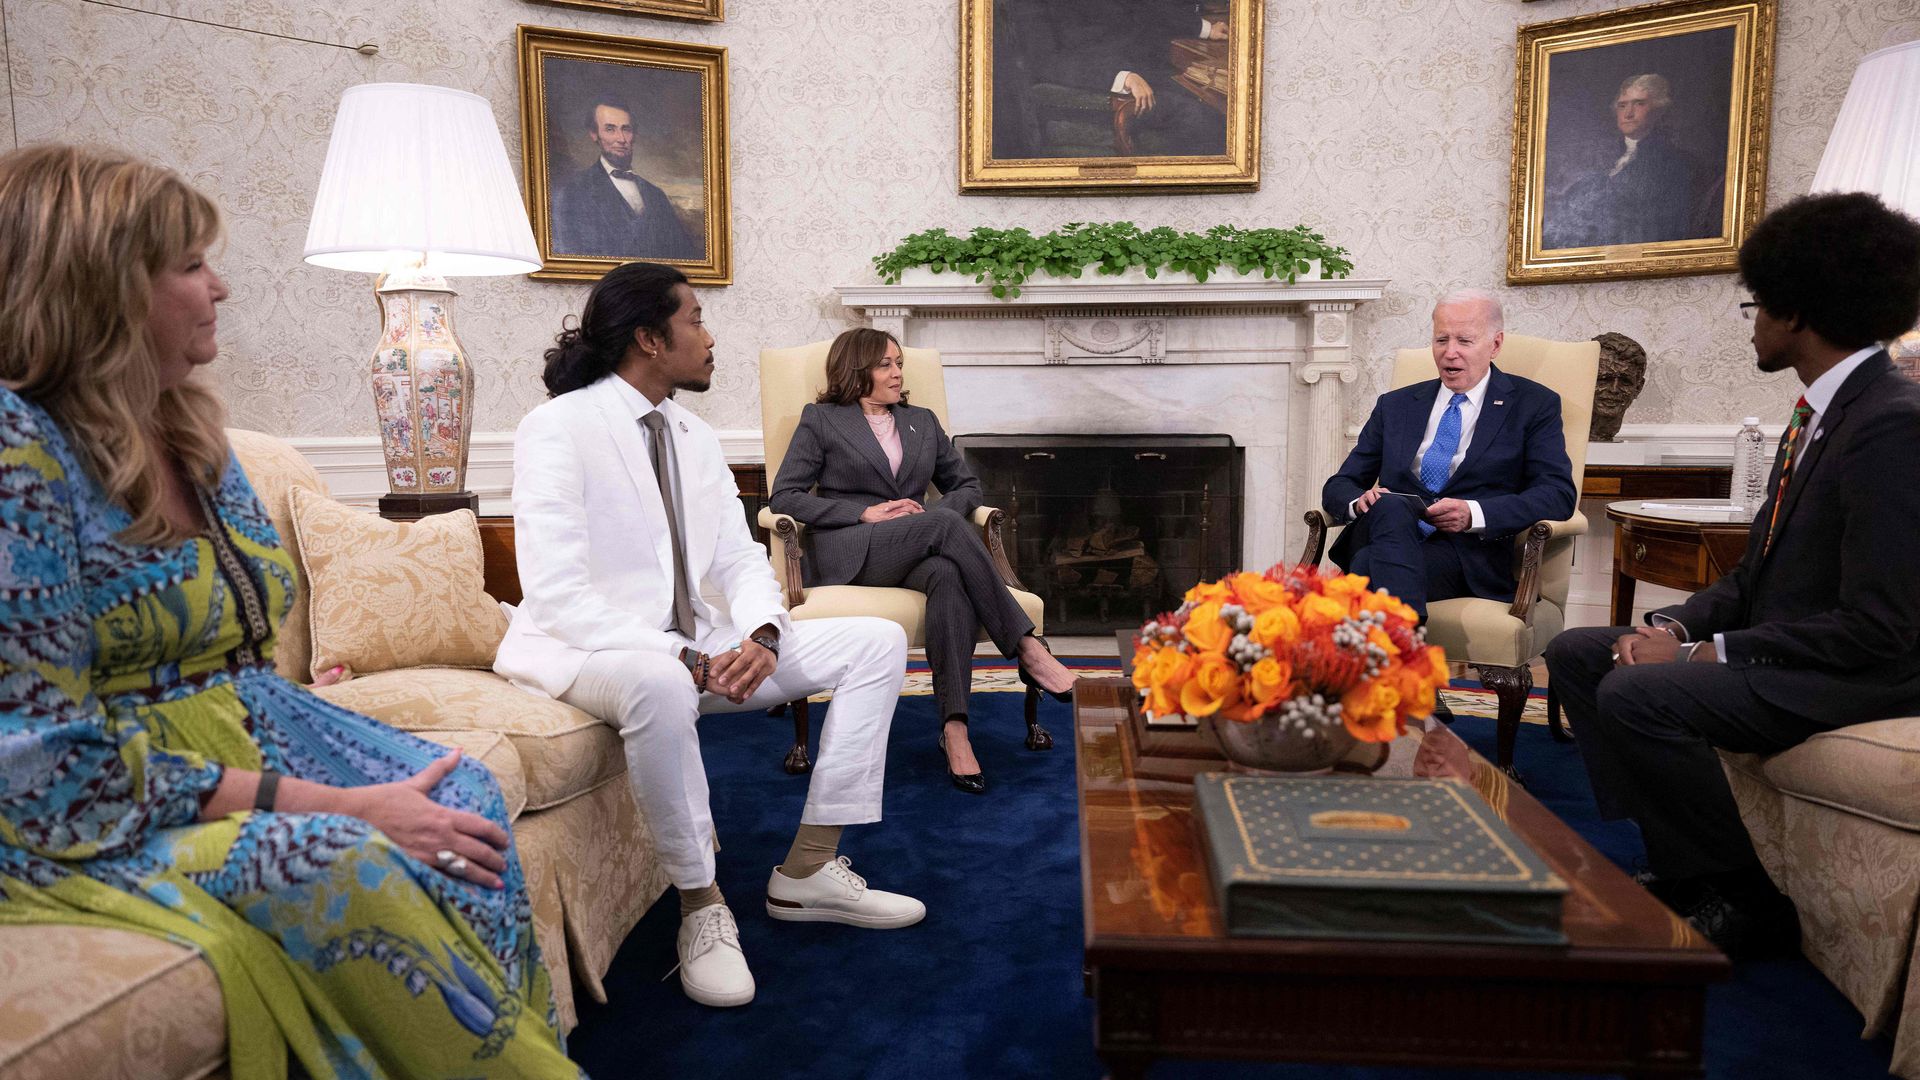 Joe Biden and Vice President Kamala Harris meet with Tennessee Democrats expelled from the Tennessee state legislature over gun control protest Justin Jones (2nd L), Justin Pearson (R) and Gloria Johnson 